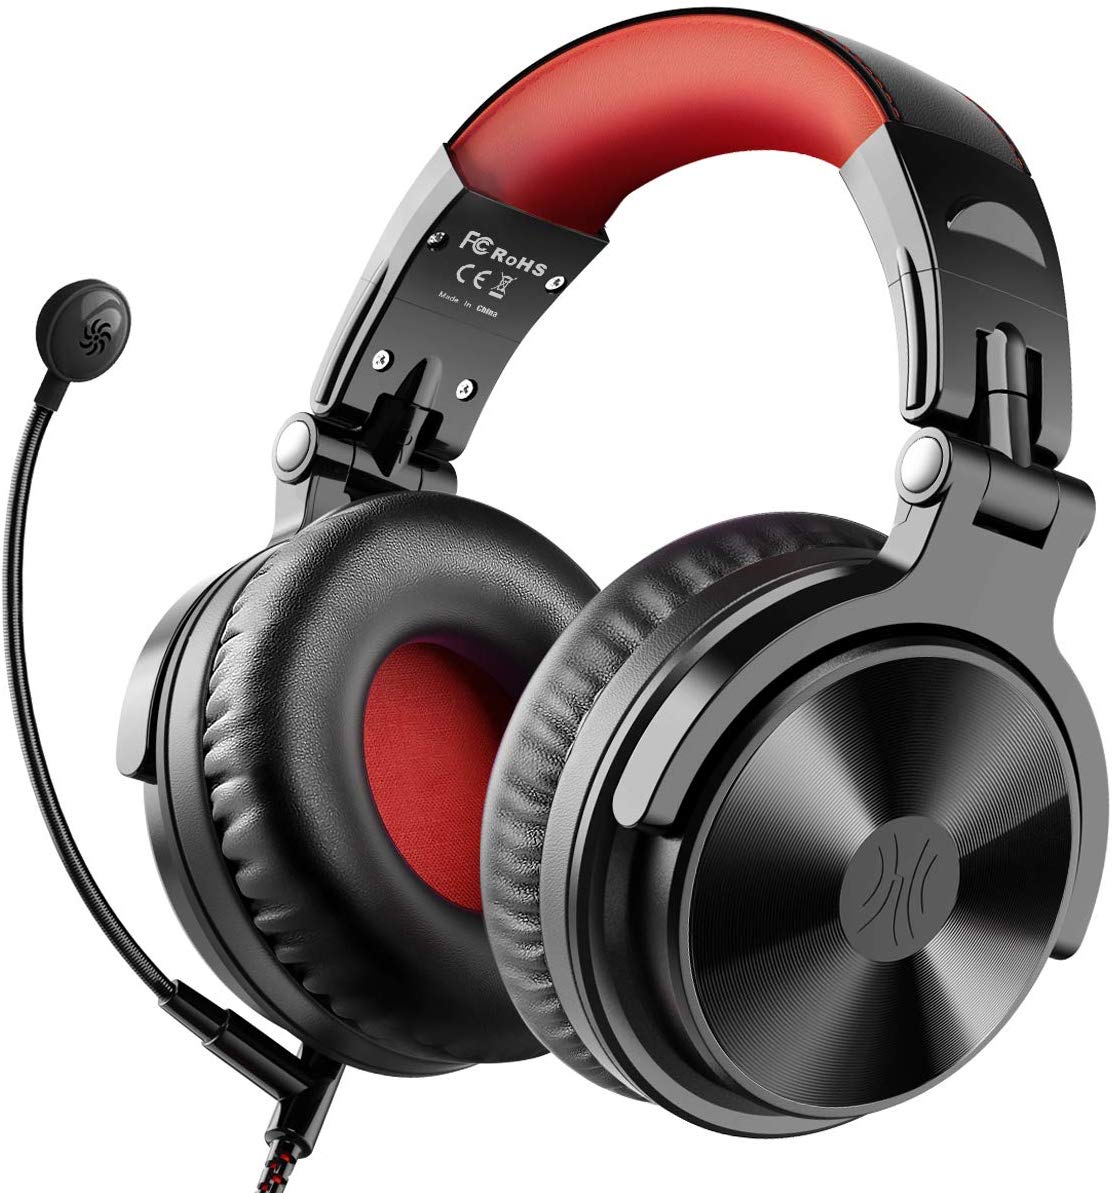 Top 8 Best Bluetooth Gaming Headsets of 2021 - Reviews and Comparison